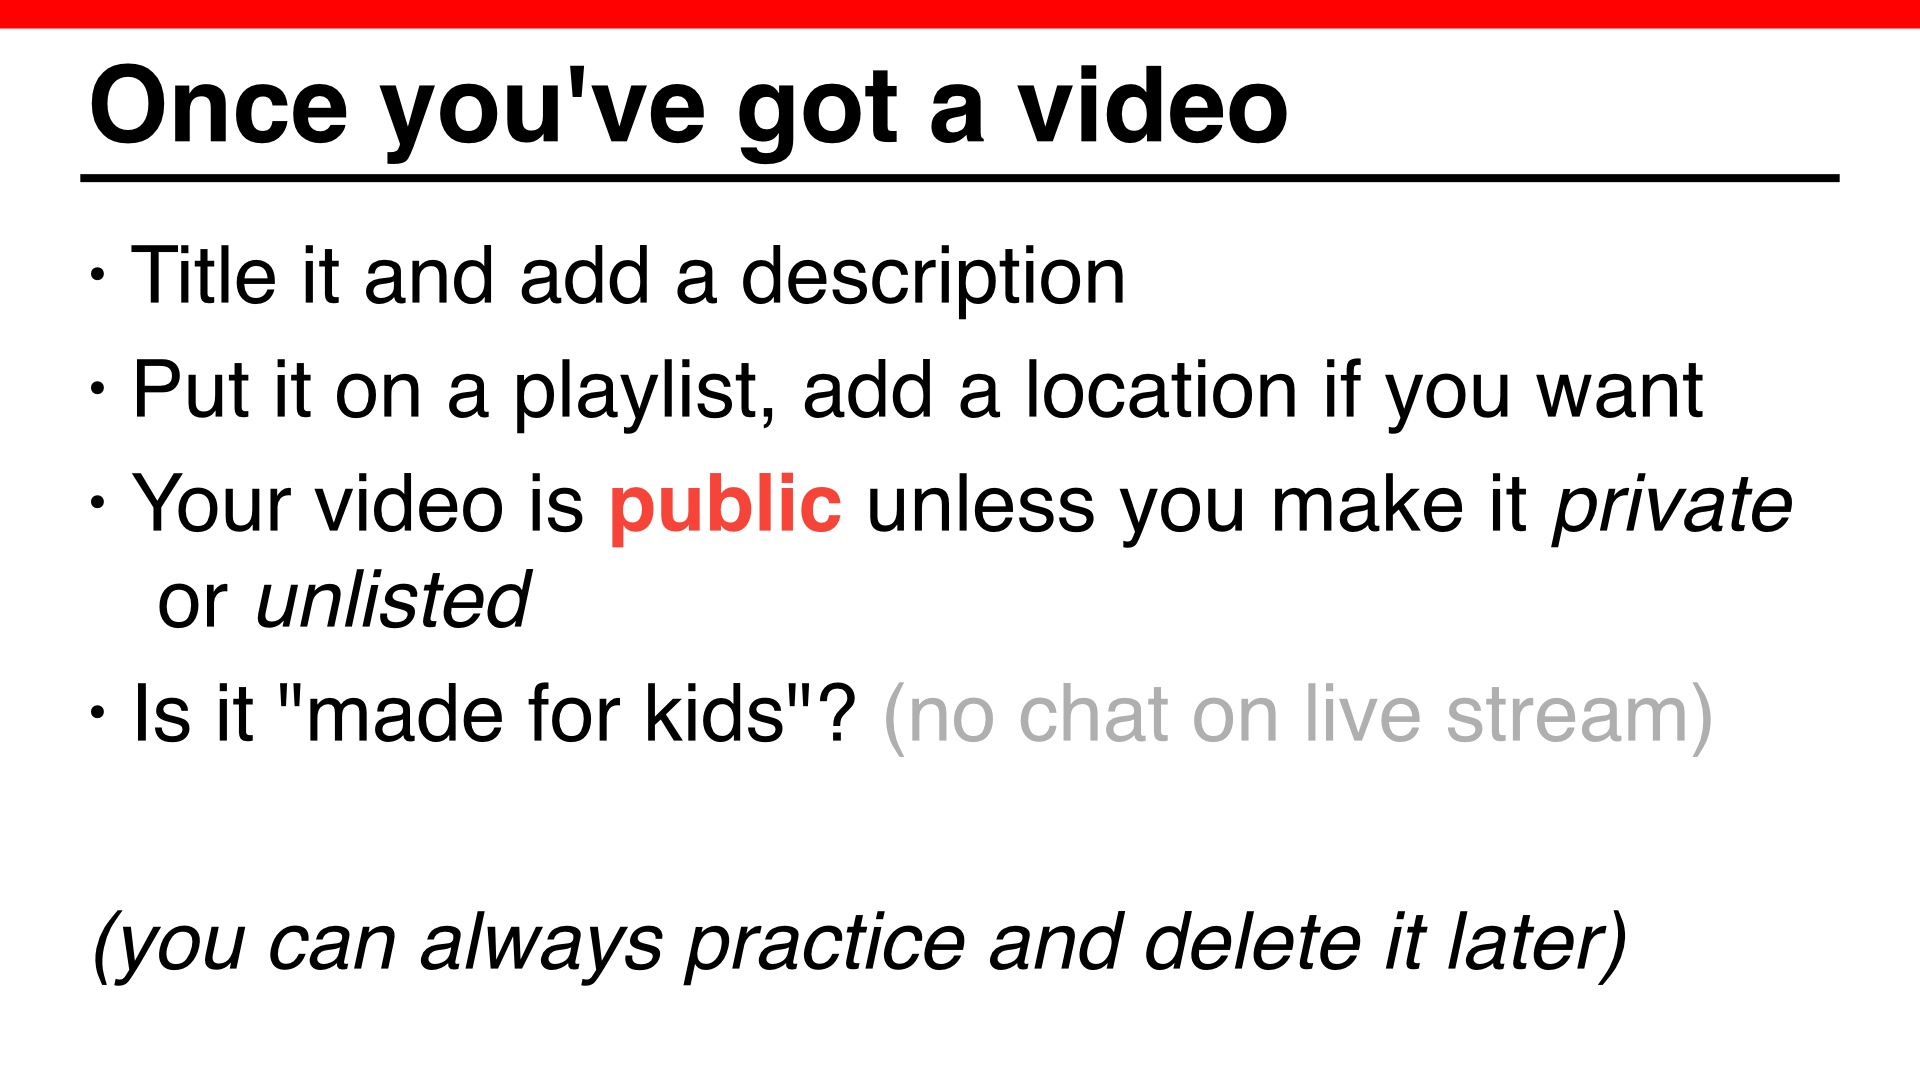 Once you've got a video.... Title it and add a description, Put it on a playlist, add a location if you want. Your video is public unless you make it private, Is it 